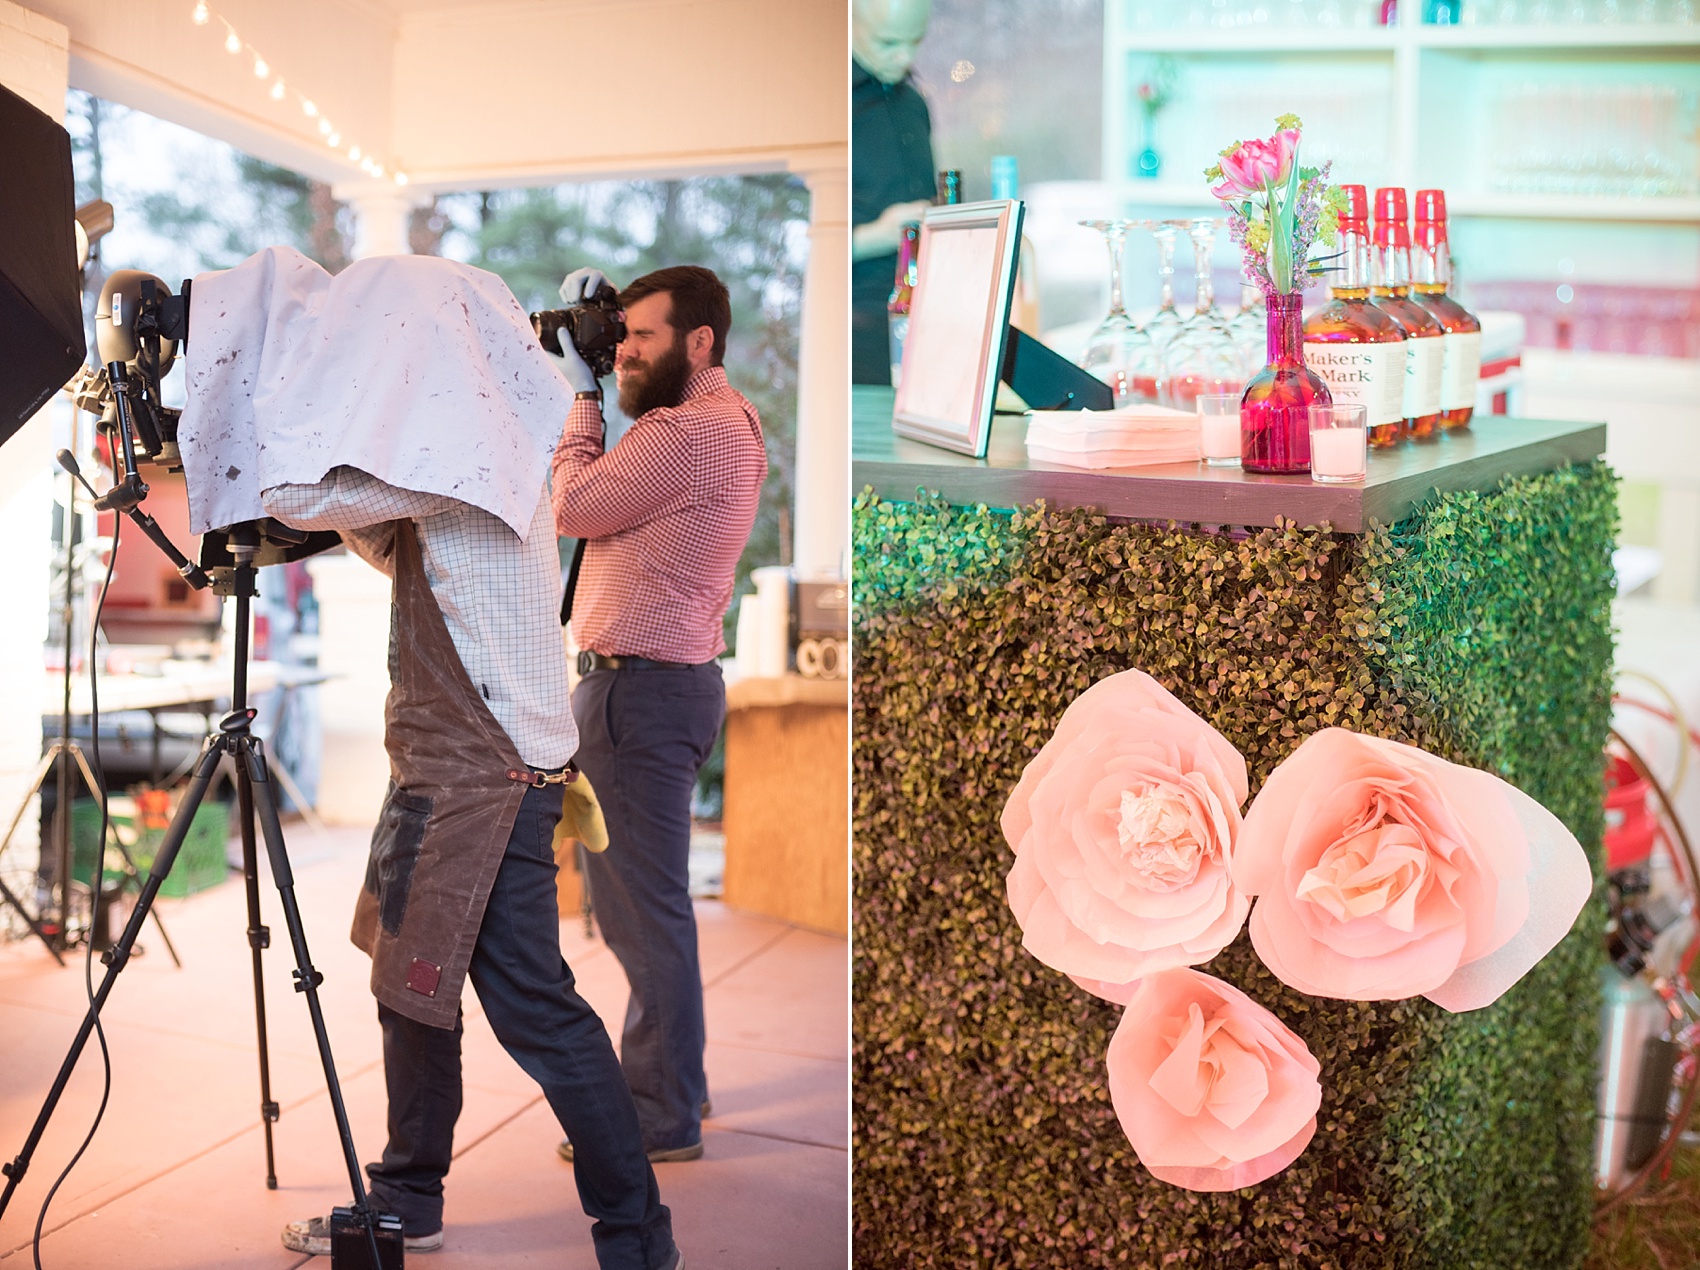 Raleigh wedding photographer Mikkel Paige captures Mim's House opening night, with an Alice in Wonderland theme.